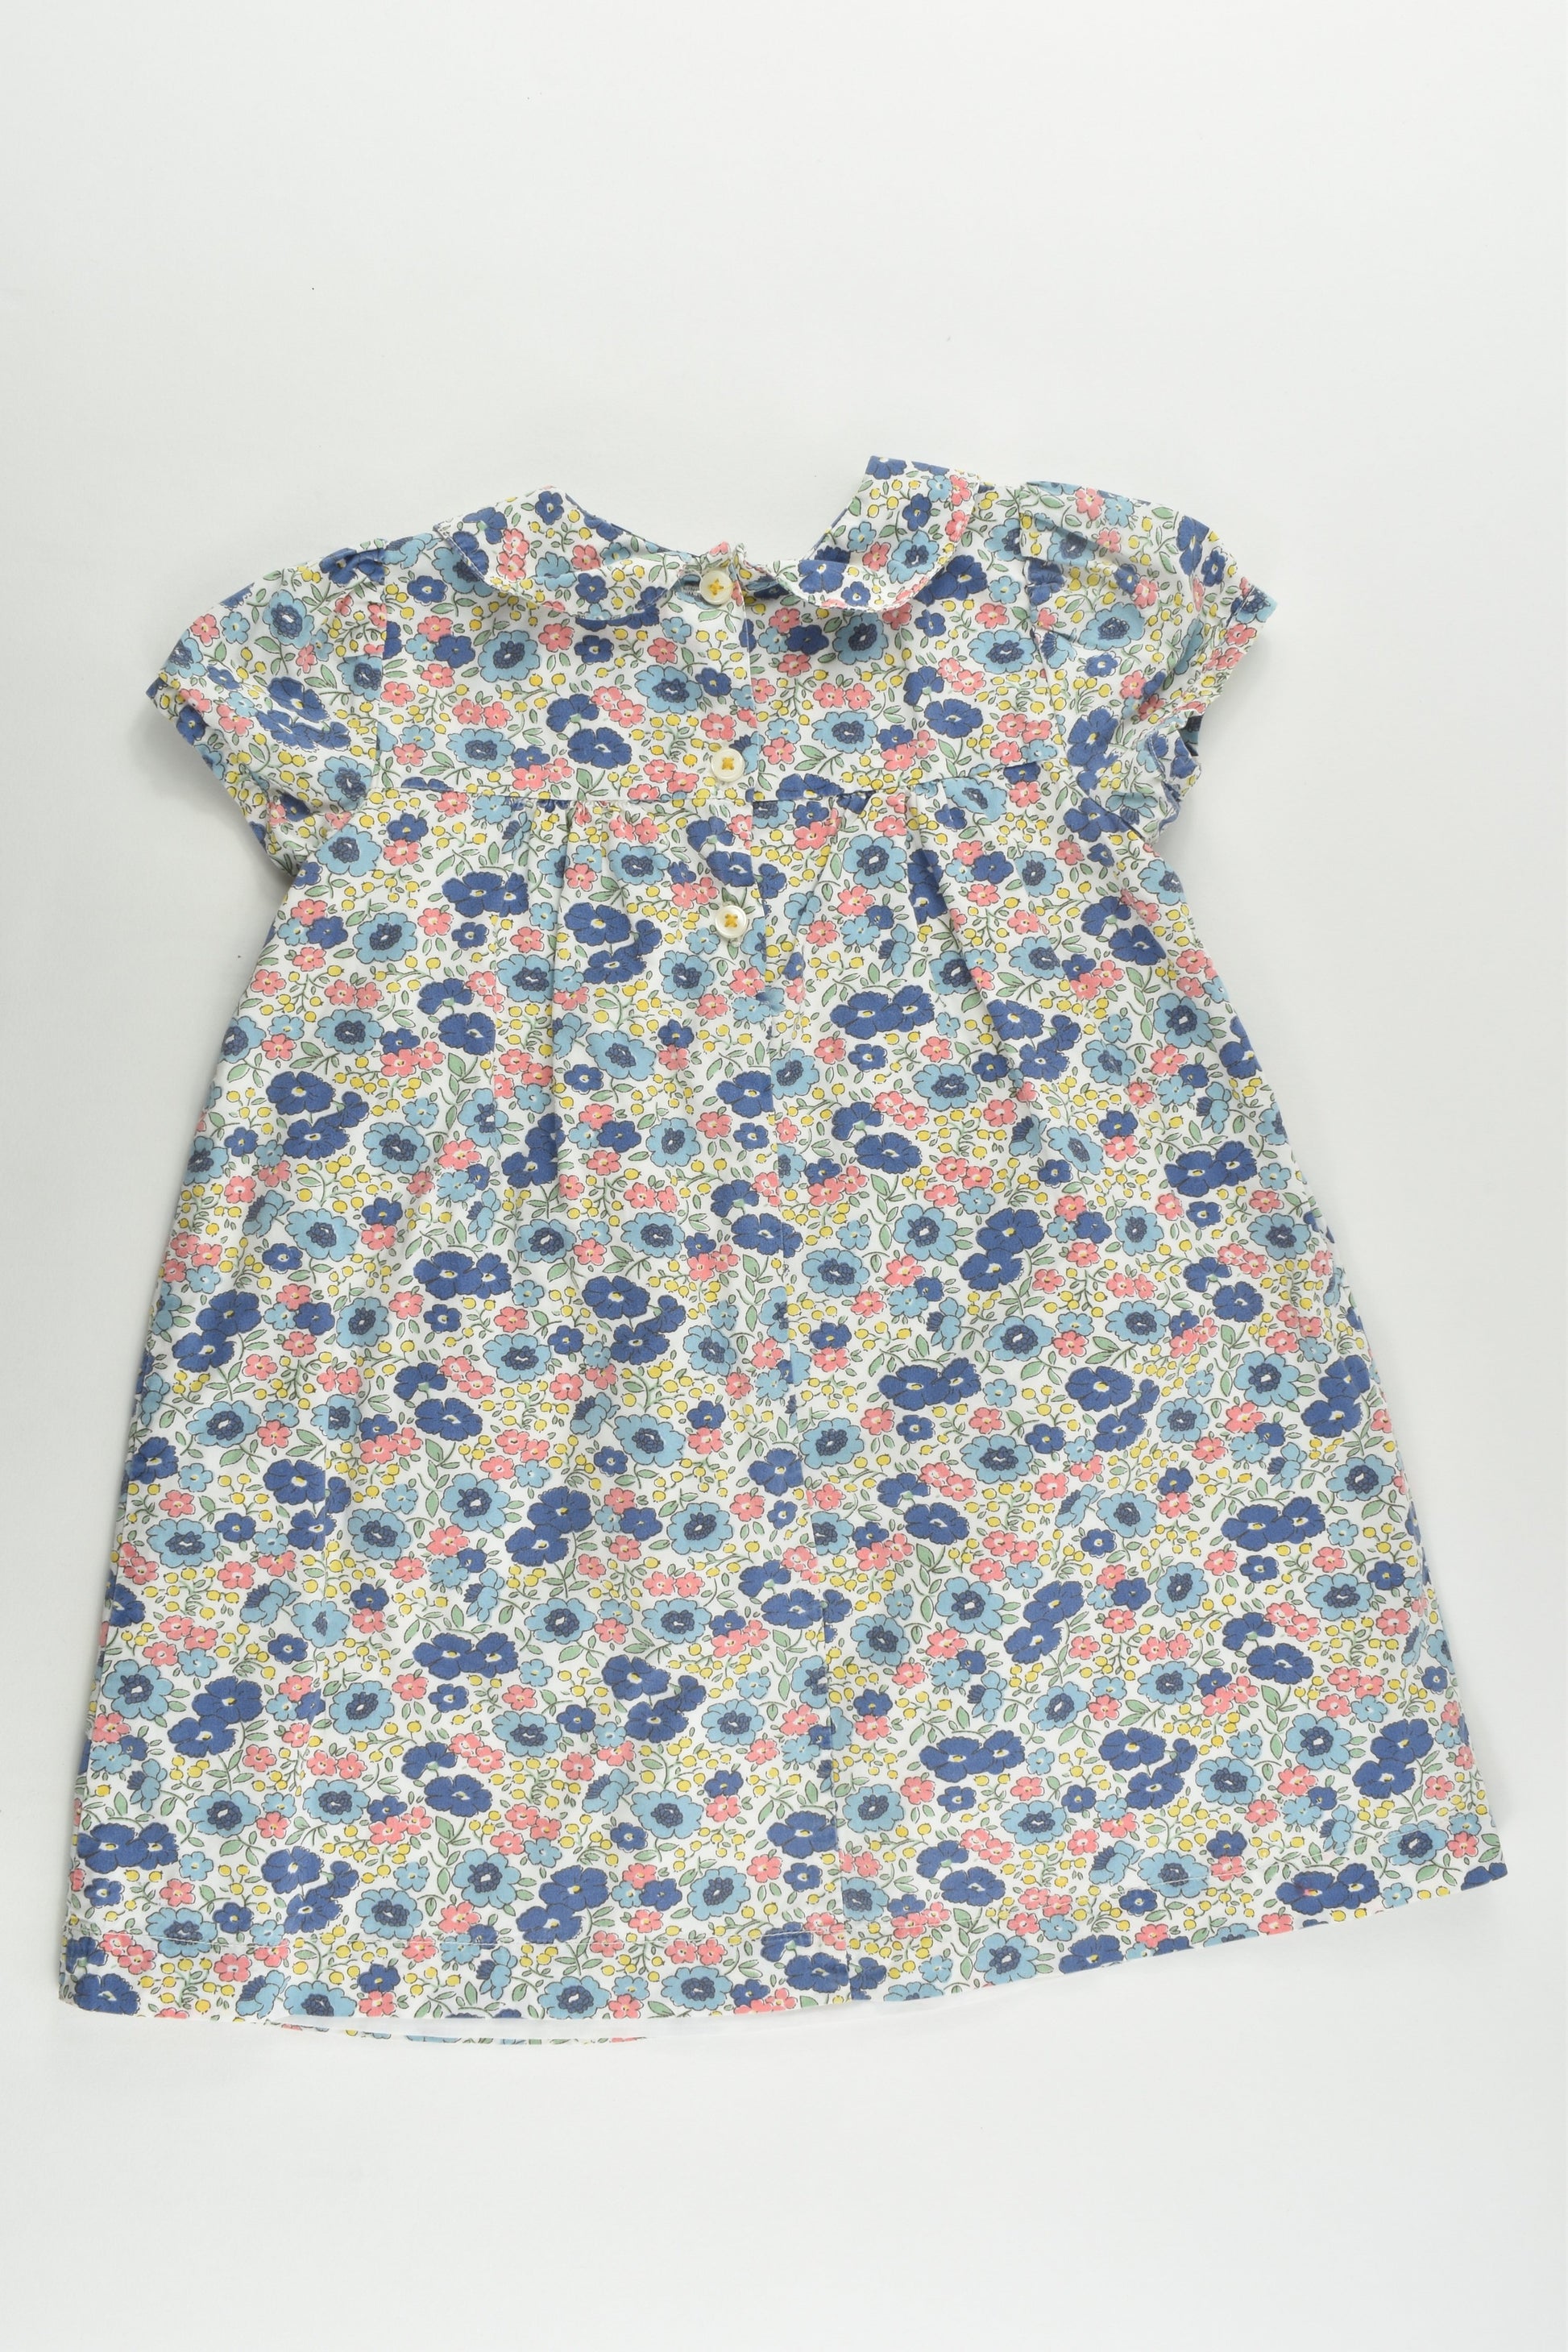 Baby Boden Size 2 (18-24 months) Liberty Print Lined Dress and Matching Bloomers